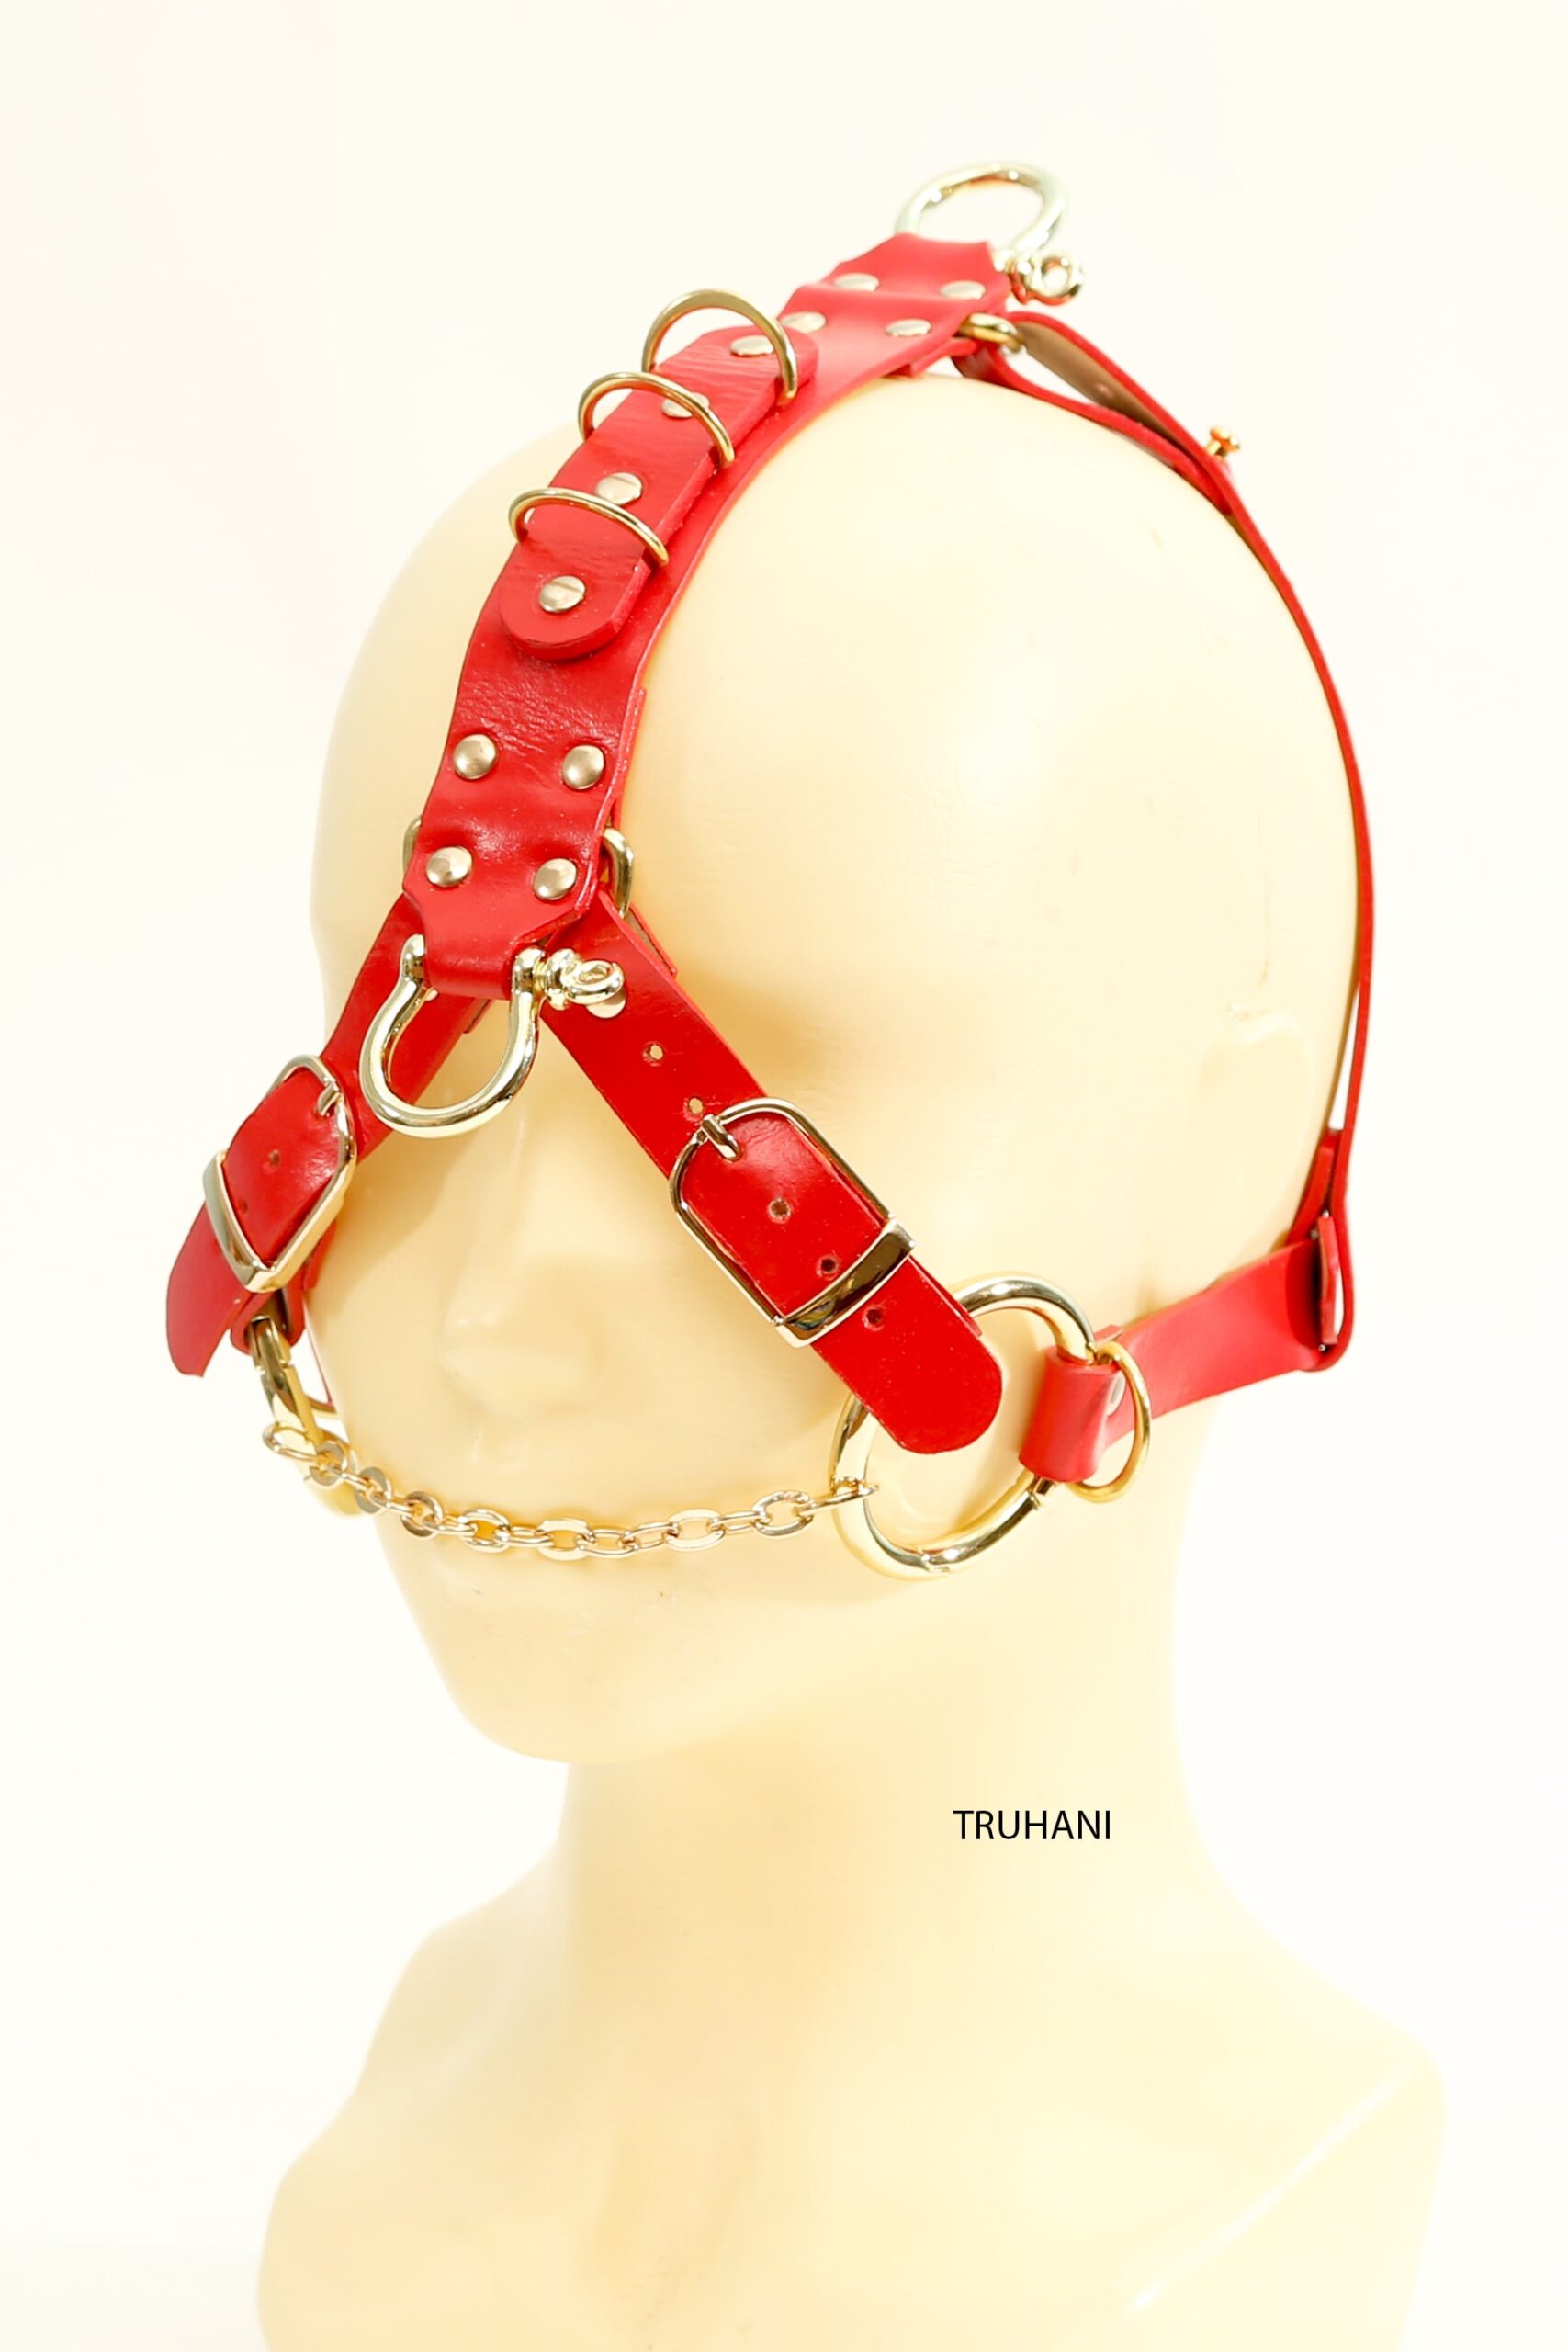 Red leather fetish submissive gag mouth dilator mask for BDSM sex fantasy with open oral fixation. Sexy restraint horse mask with snaffle bit. Bridle for pony play and Kinky party